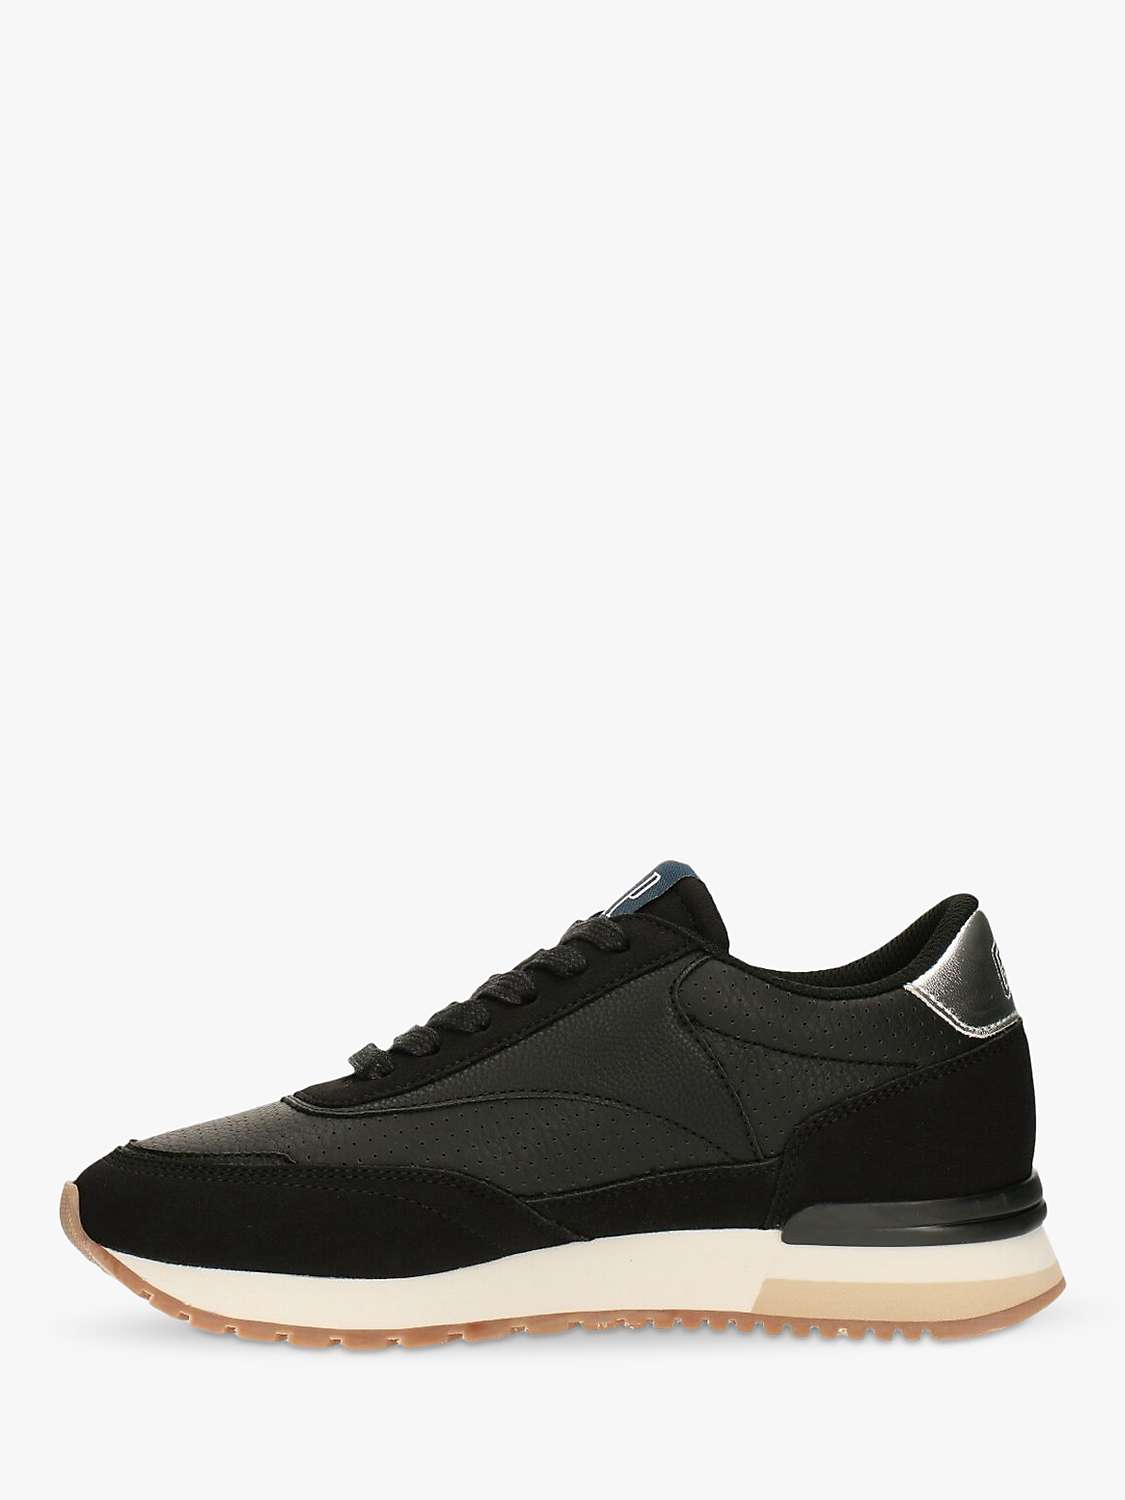 Buy Gap Kids' New York Lace Up Trainers, Black Online at johnlewis.com